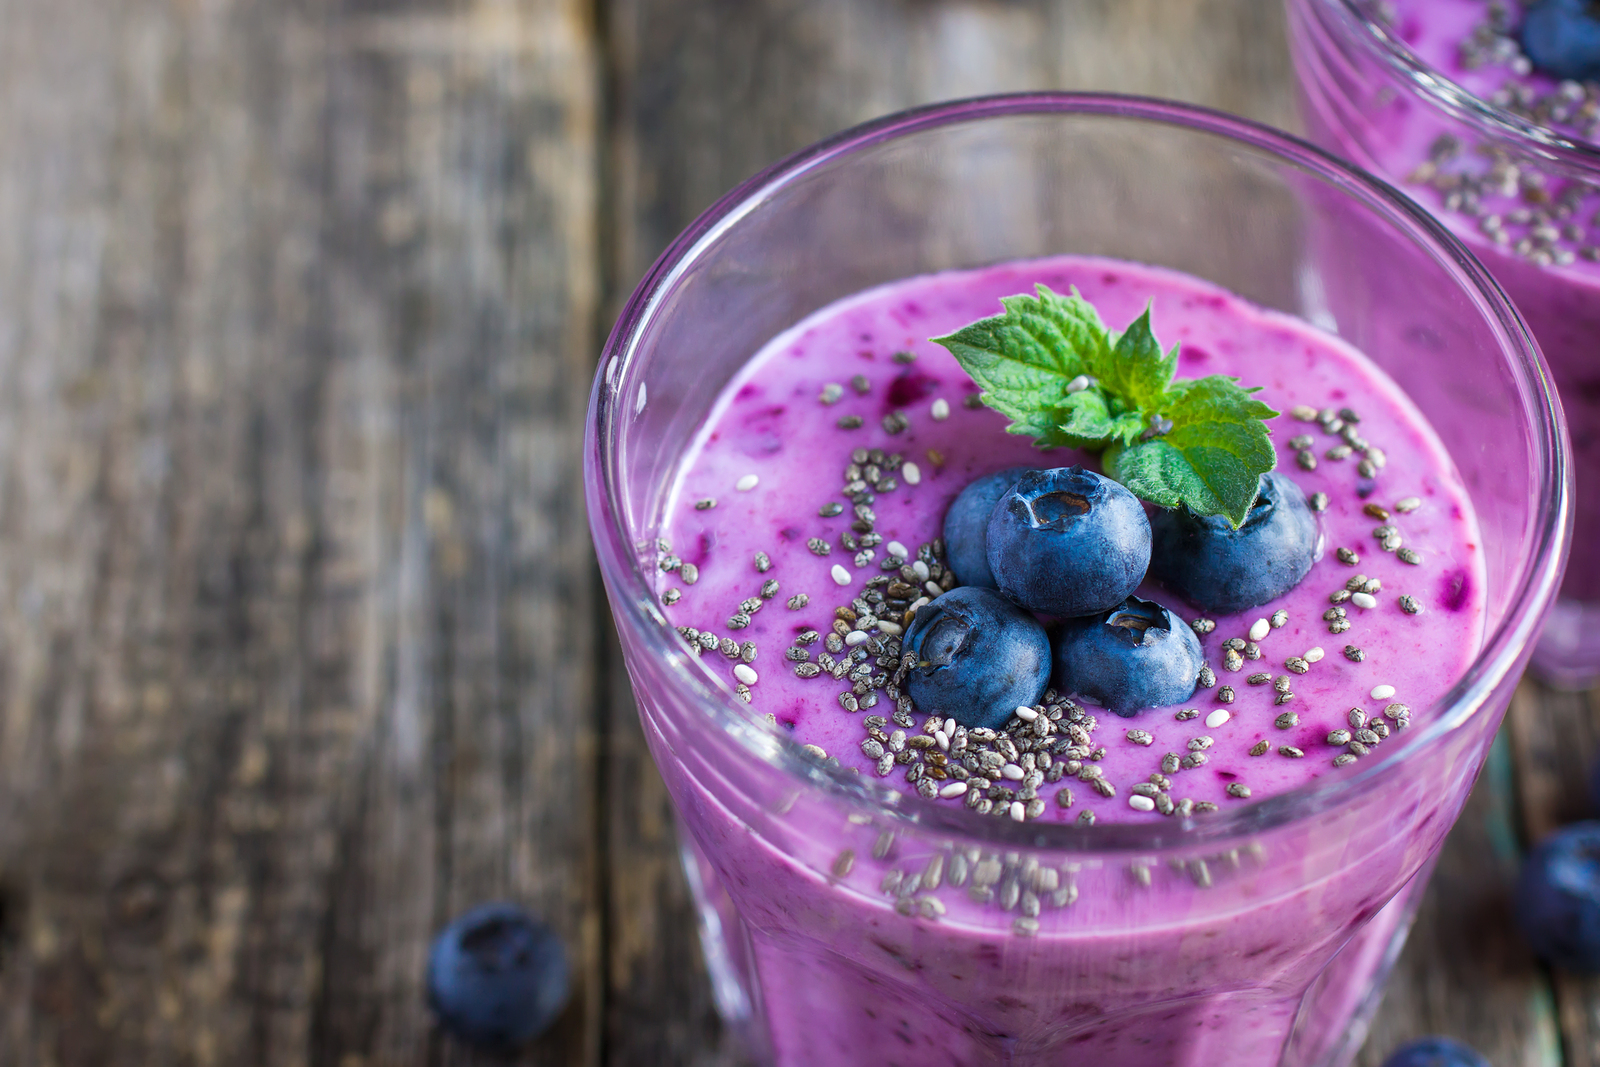 A protein smoothie can contain much more than protein powder.